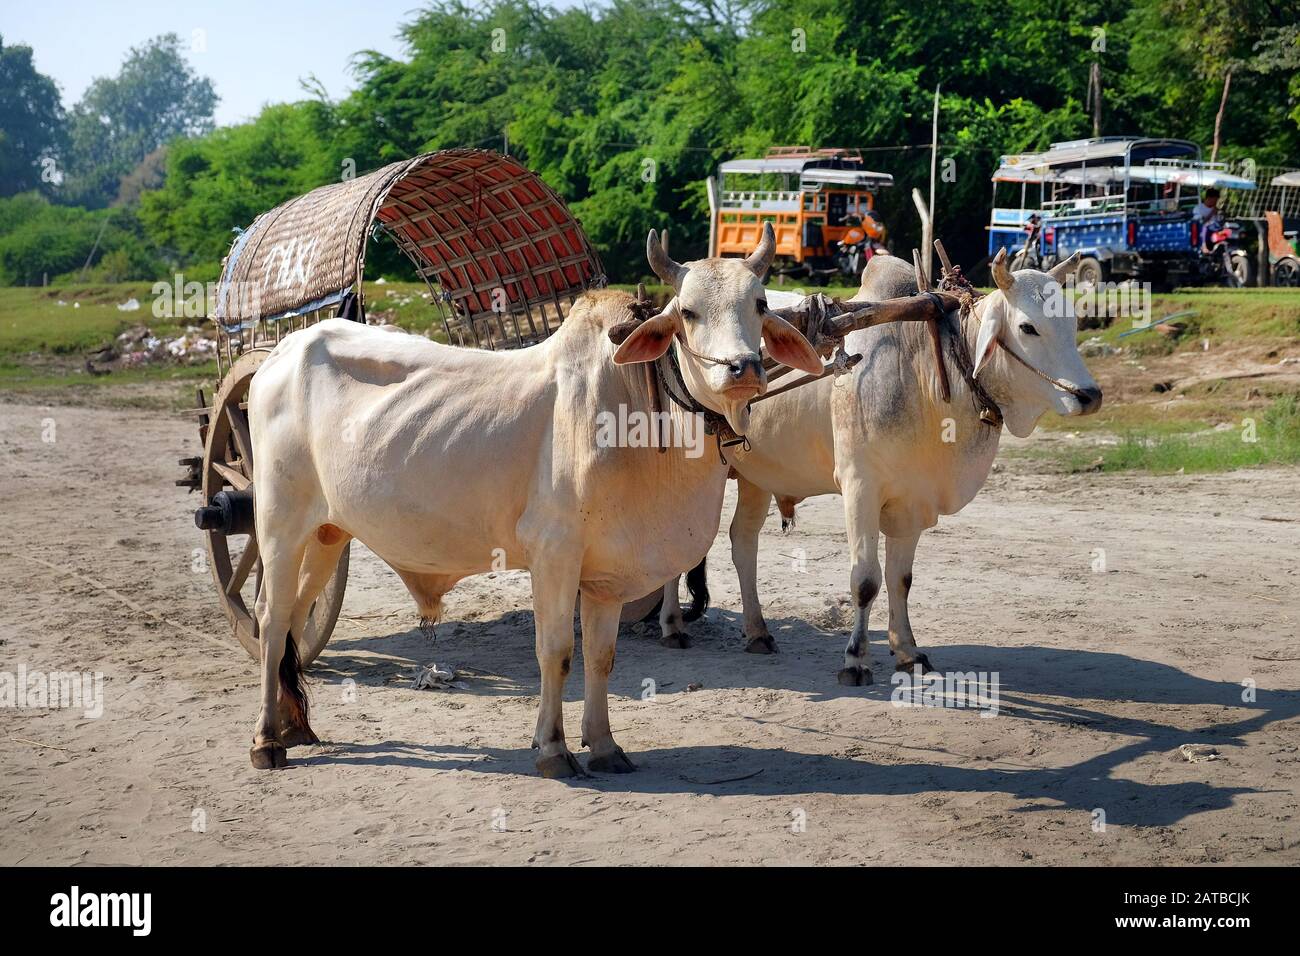 White oxen pulling a wooden cart made of bamboo, serving as taxi, near Mandalay, Myanmar, against a background of green vegetation. Stock Photo